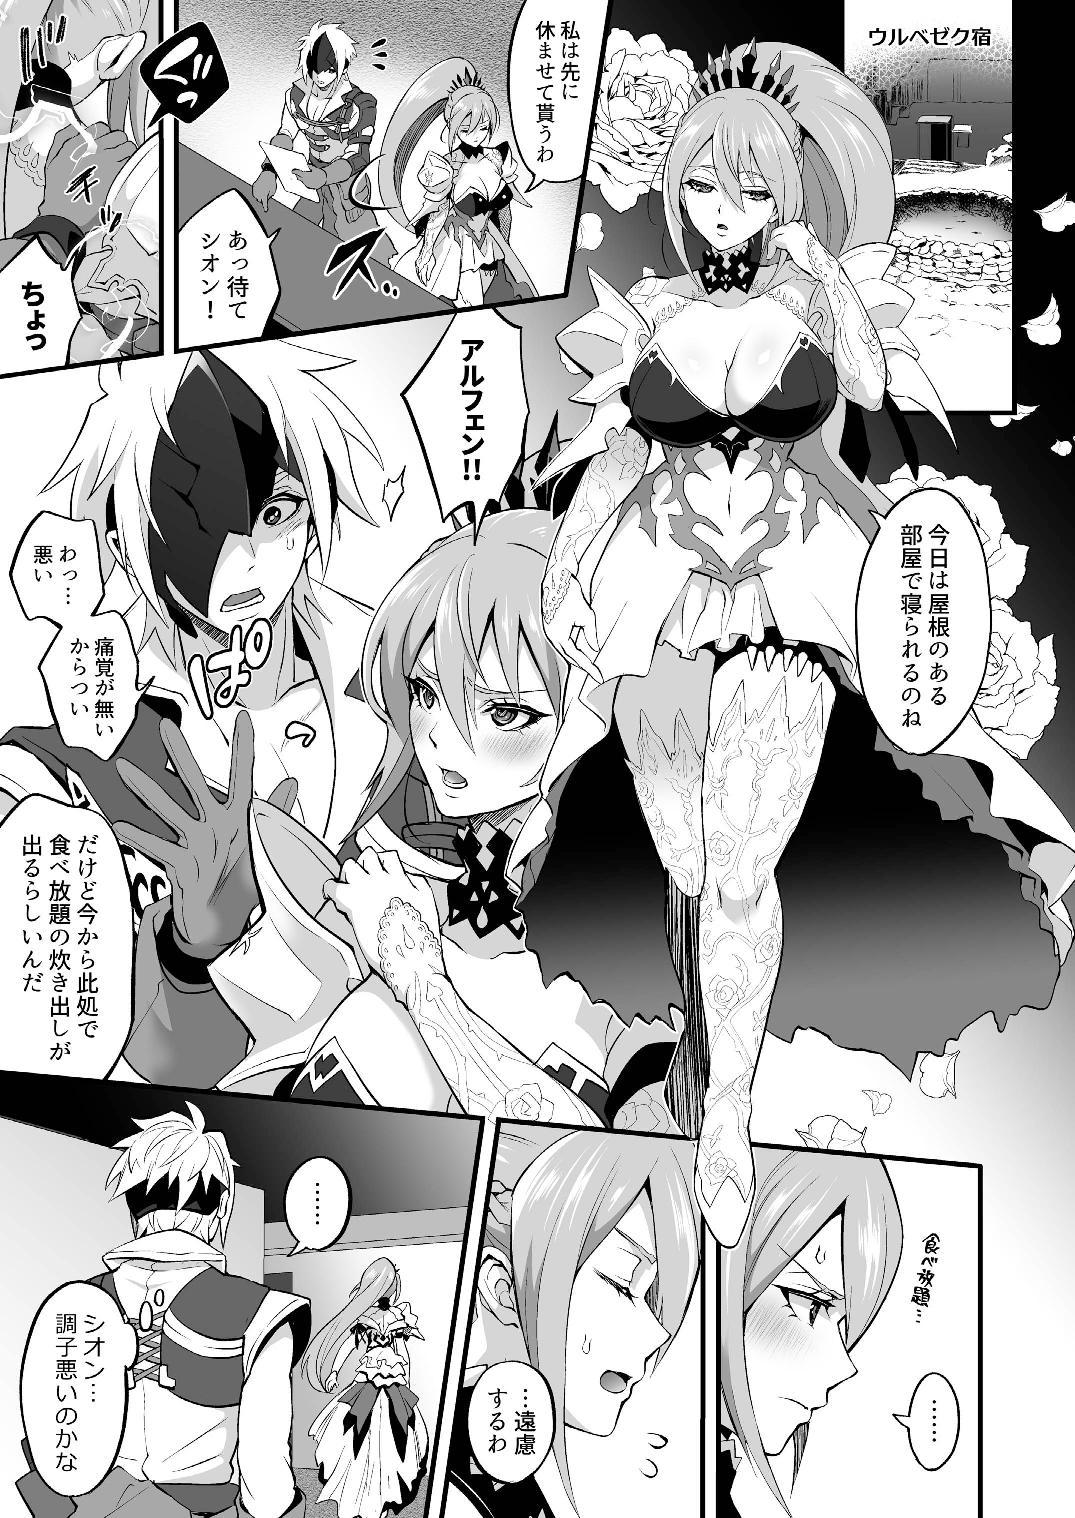 Reality 私に詰め寄ると〇〇〇がイくわよ…! - Tales of arise Monstercock - Page 3